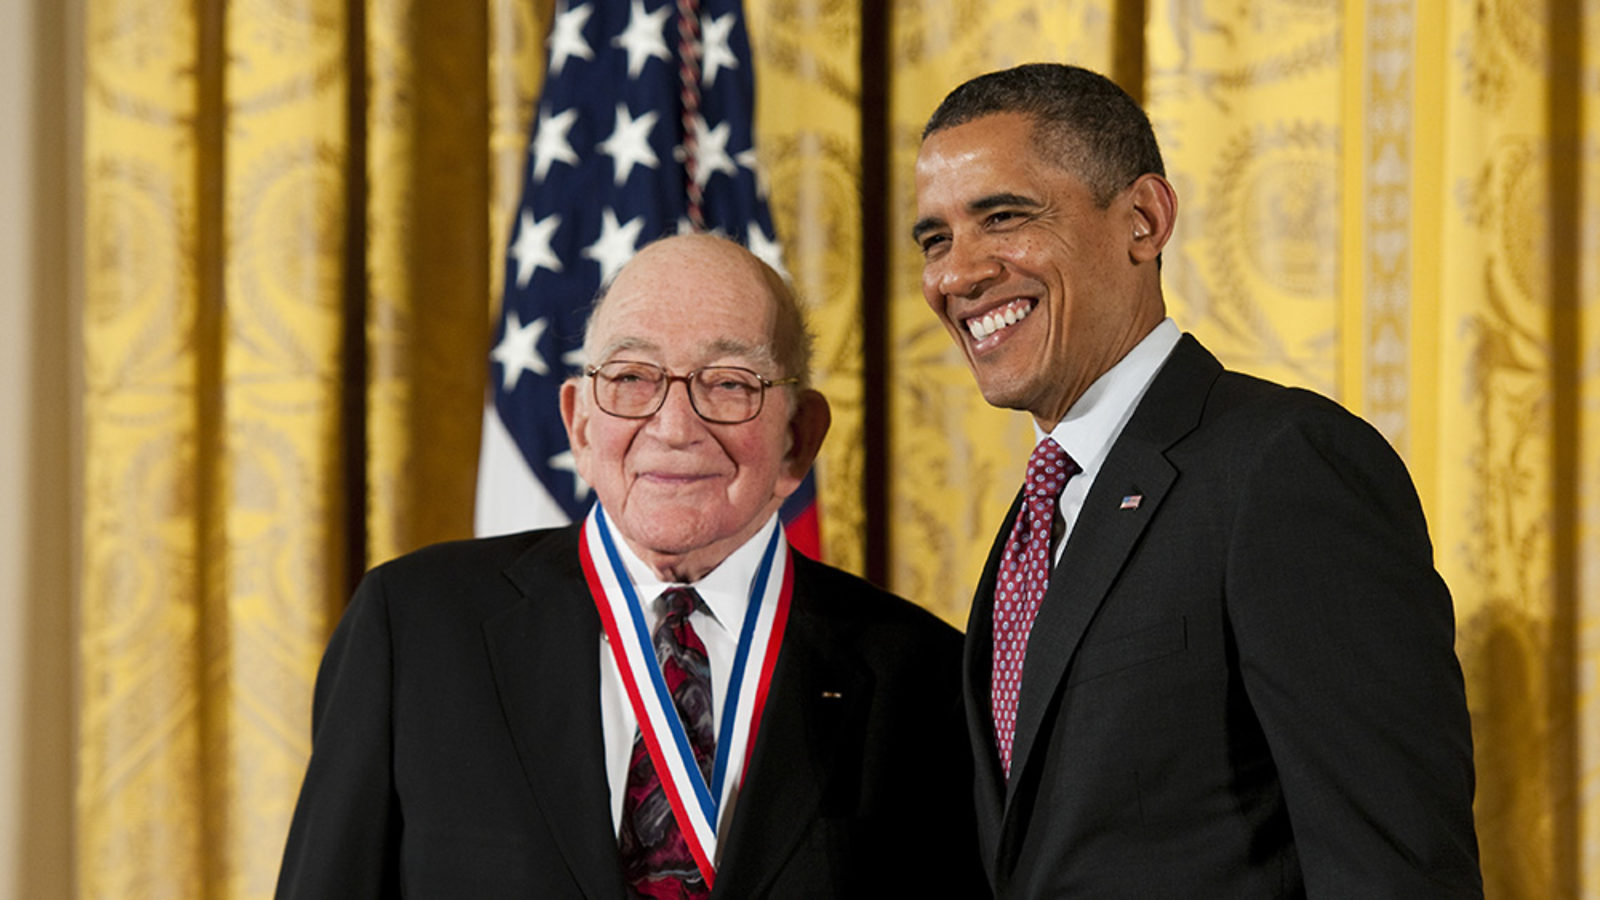 Photo of 2011 National Medal Drell: Sidney Drell receives the National Medal of Science from President Obama